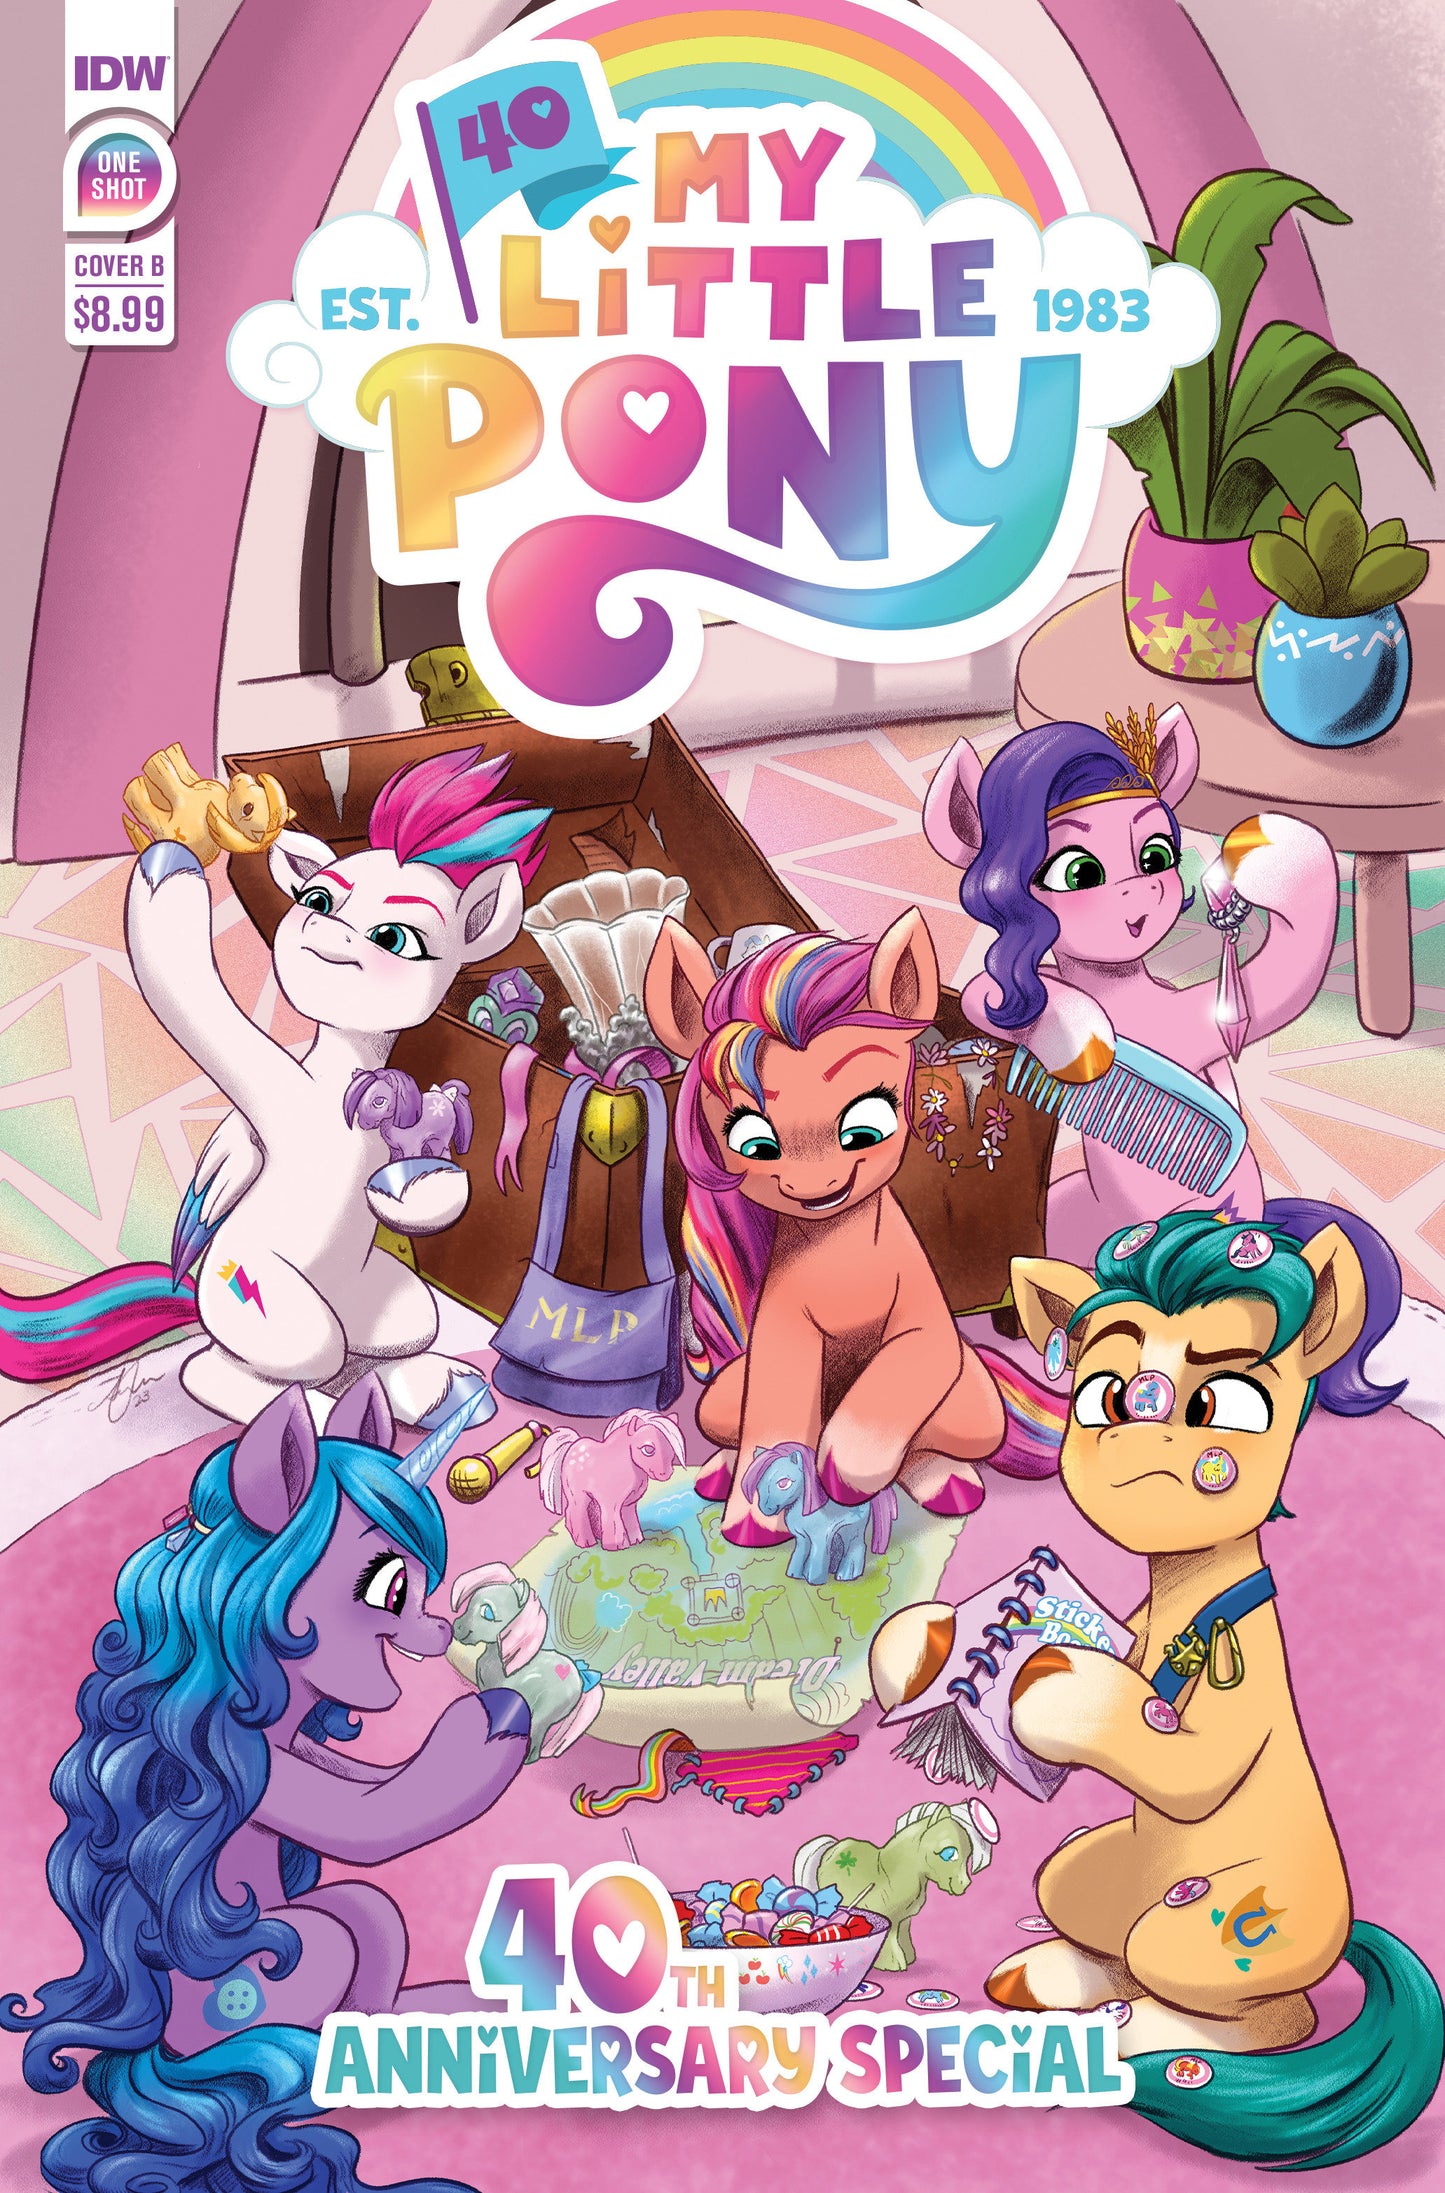 My Little Pony 40th Anniversary Special Variant B (Mebberson)